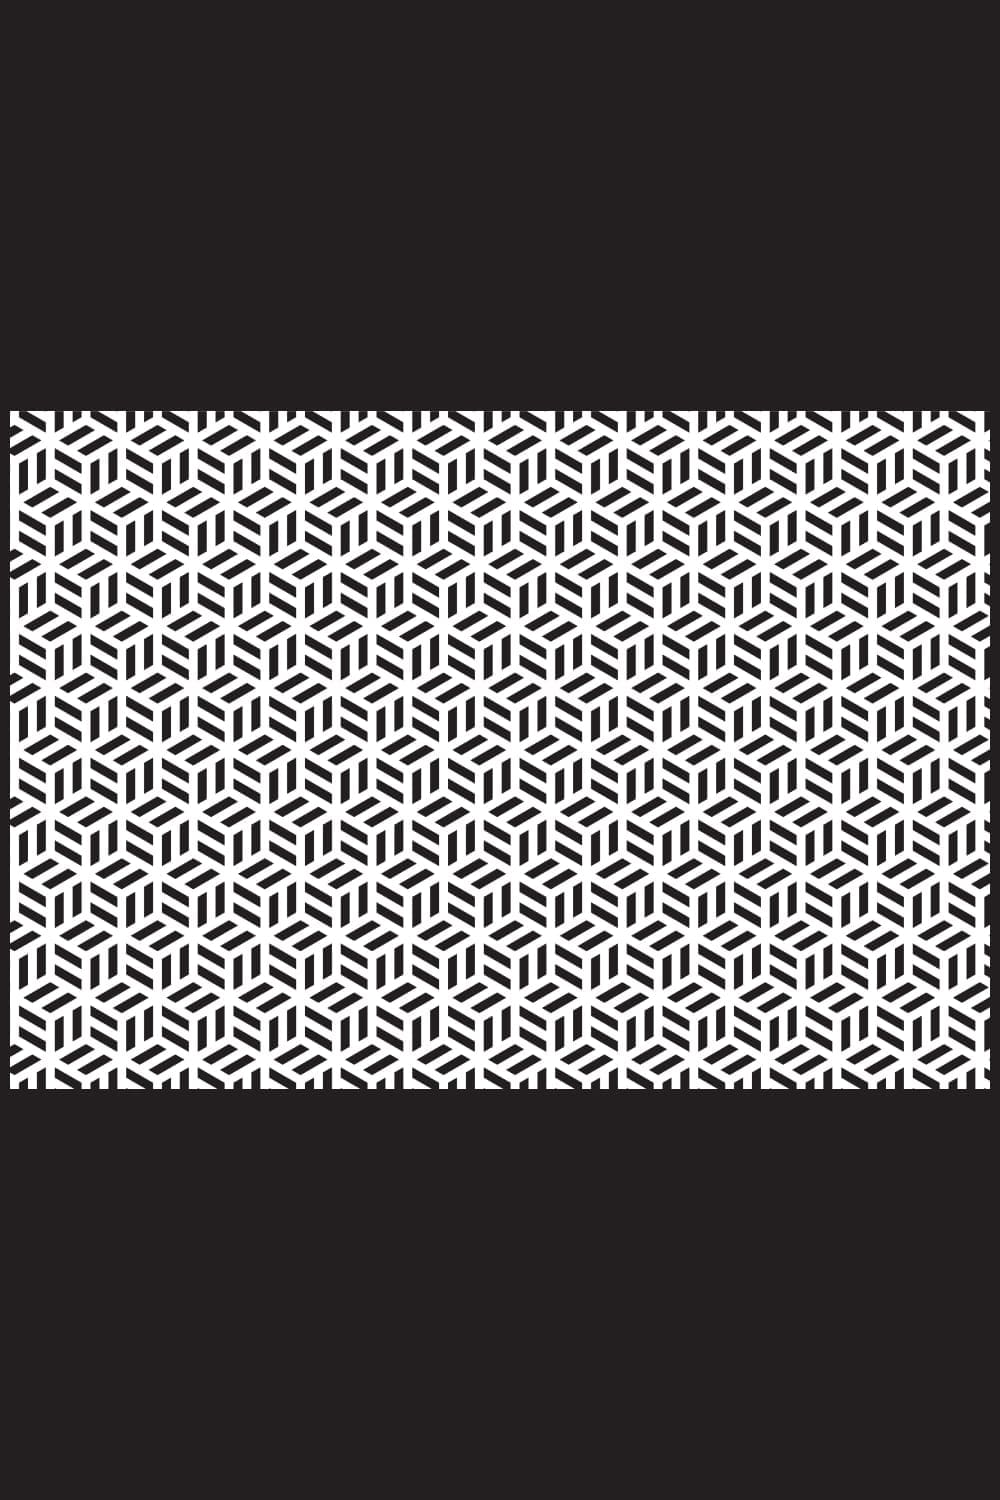 Collage with Seamless Black and White Cube Geometric Pattern.